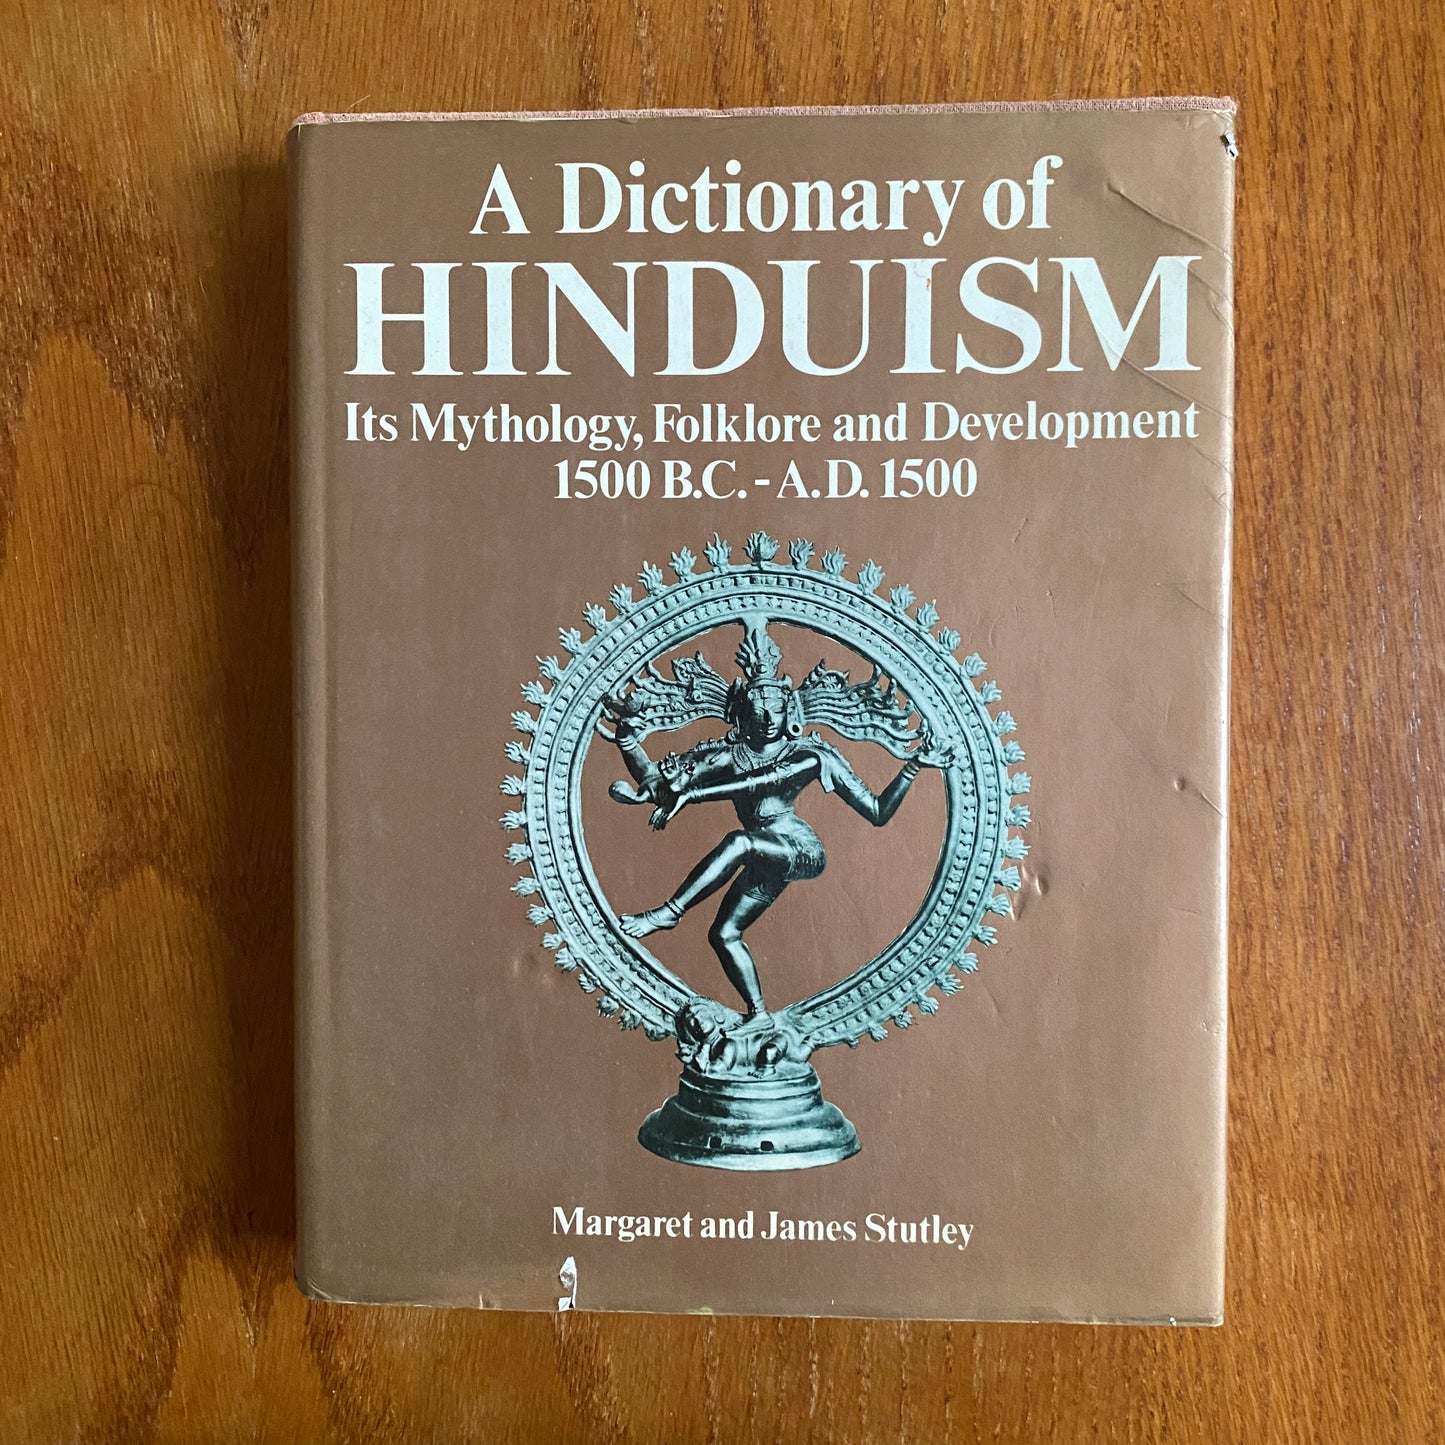 A Dictionary of Hinduism: Its Mythology, Folklore and Development 1500 B.C. - A.D. 1500  - Margaret and James Stutley”